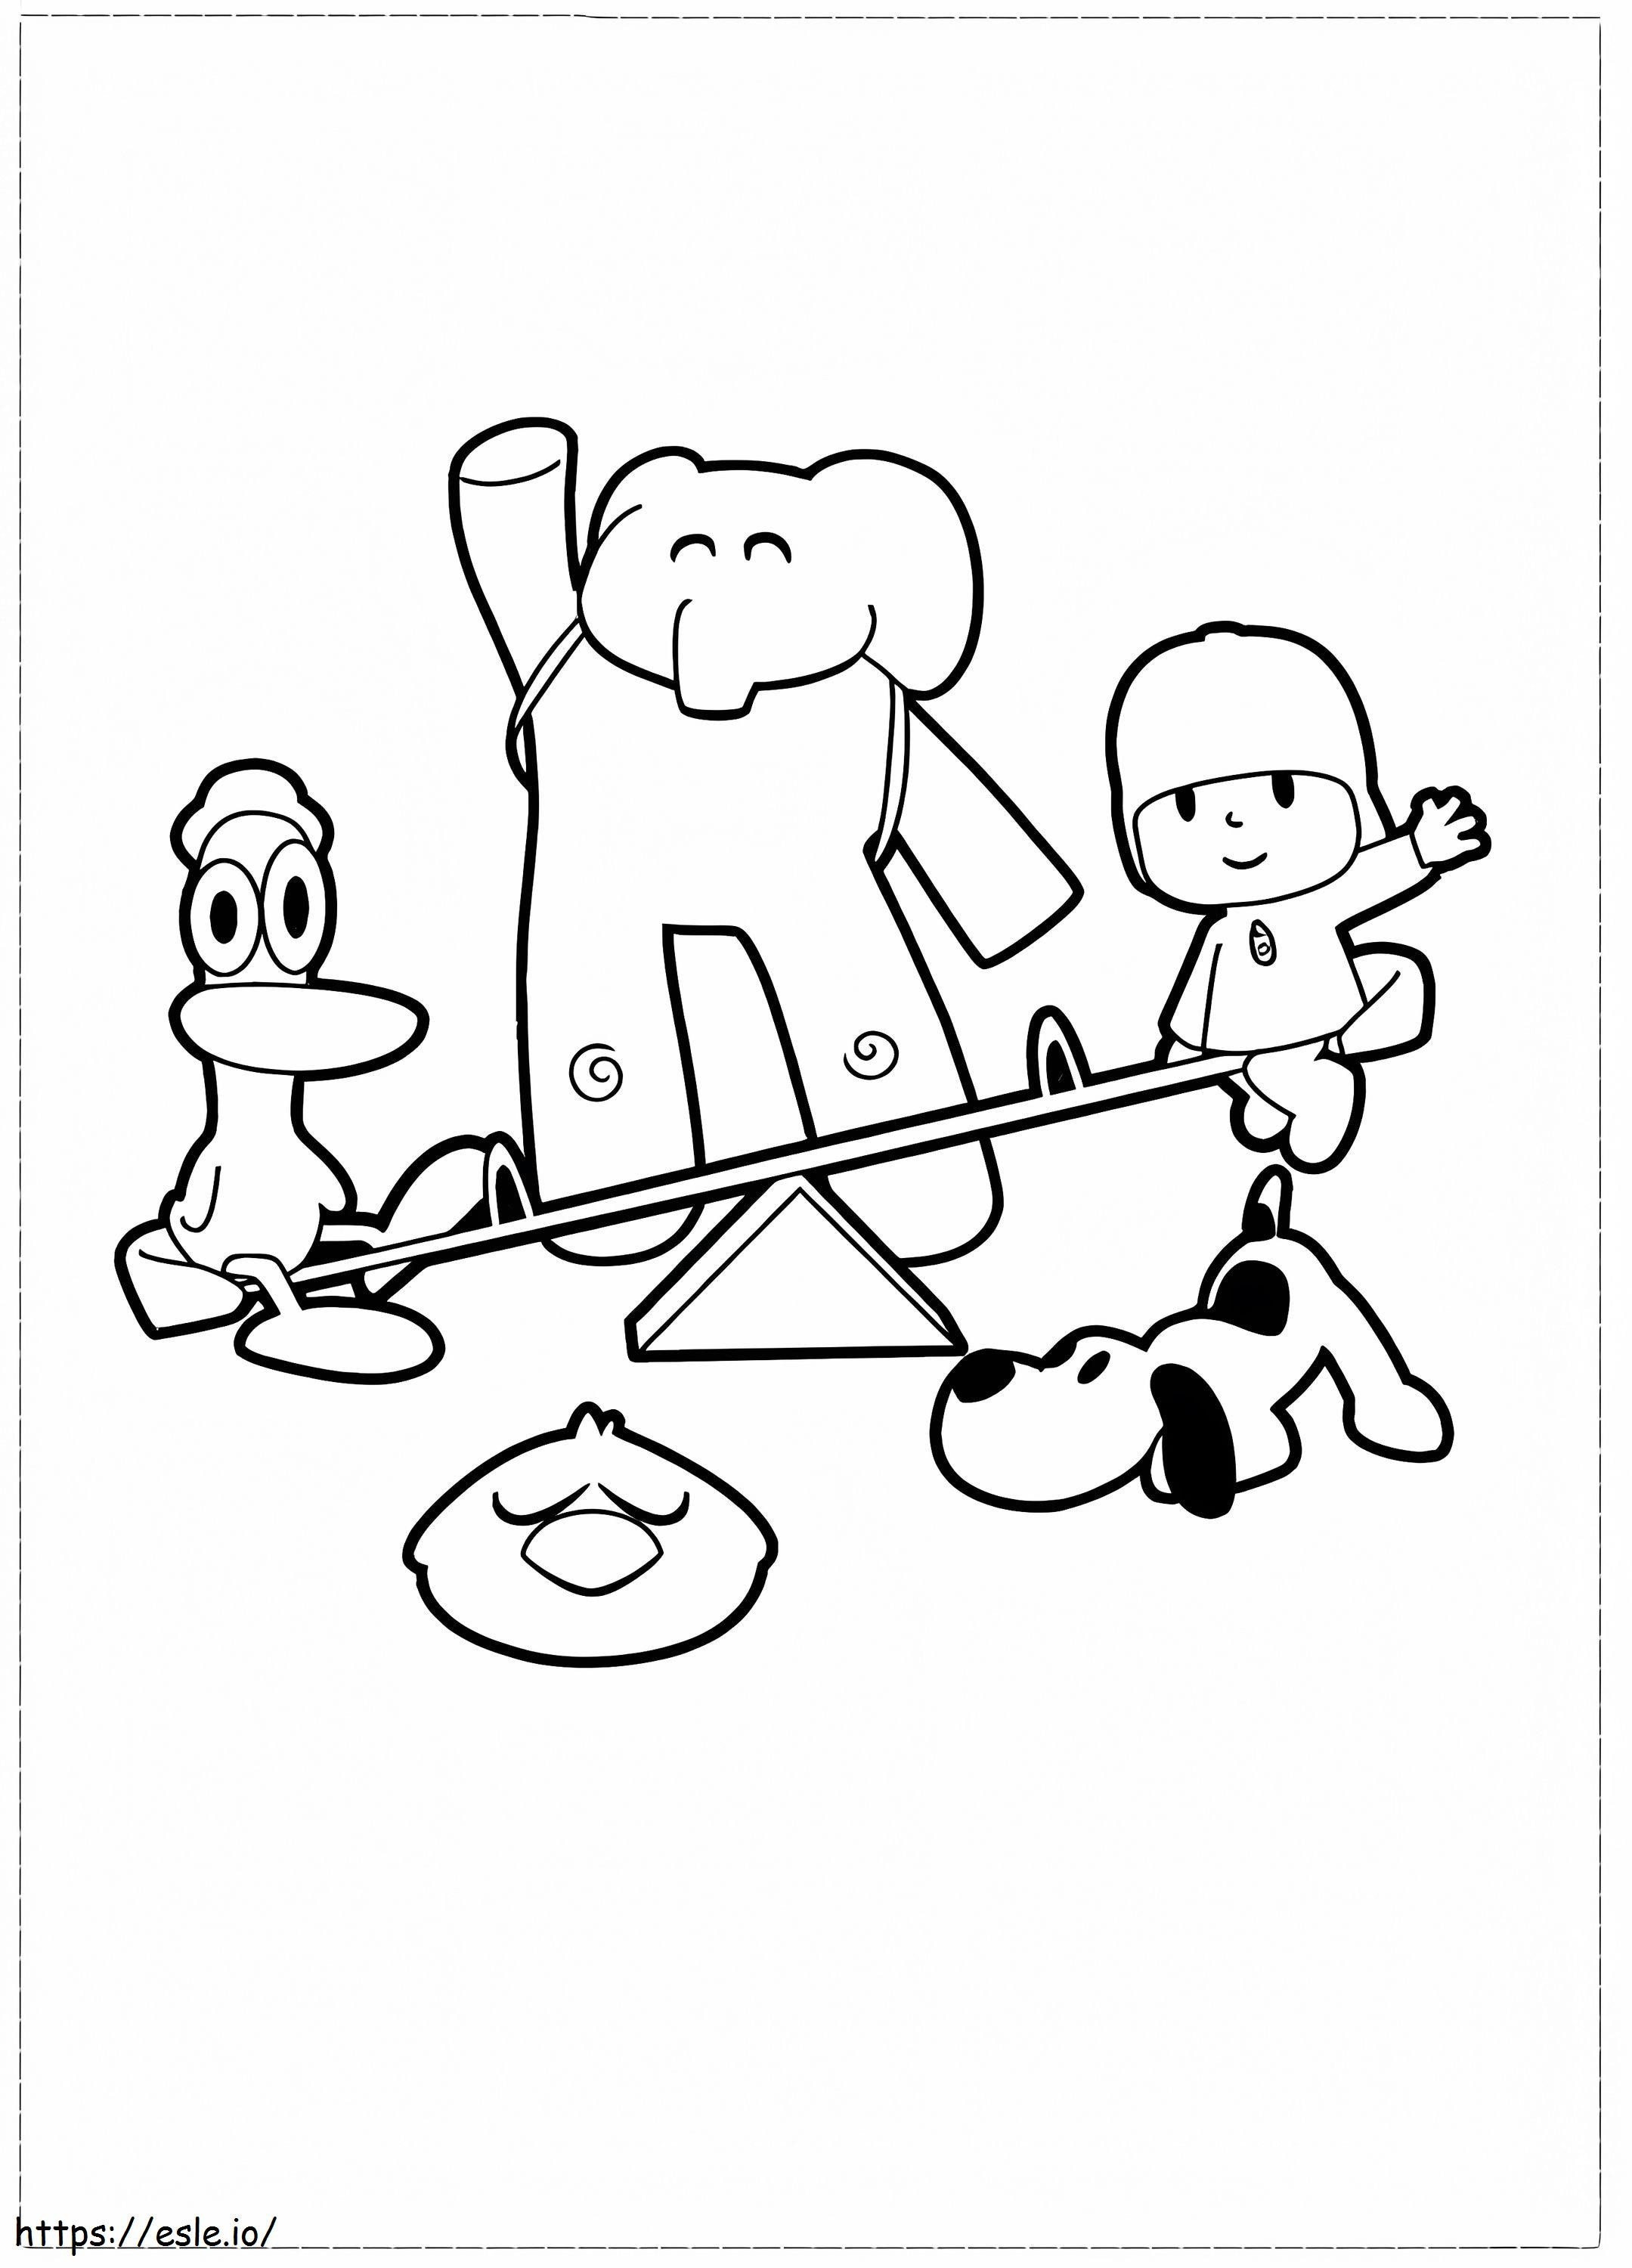 Pocoyo And Friends Playing Seesaw coloring page